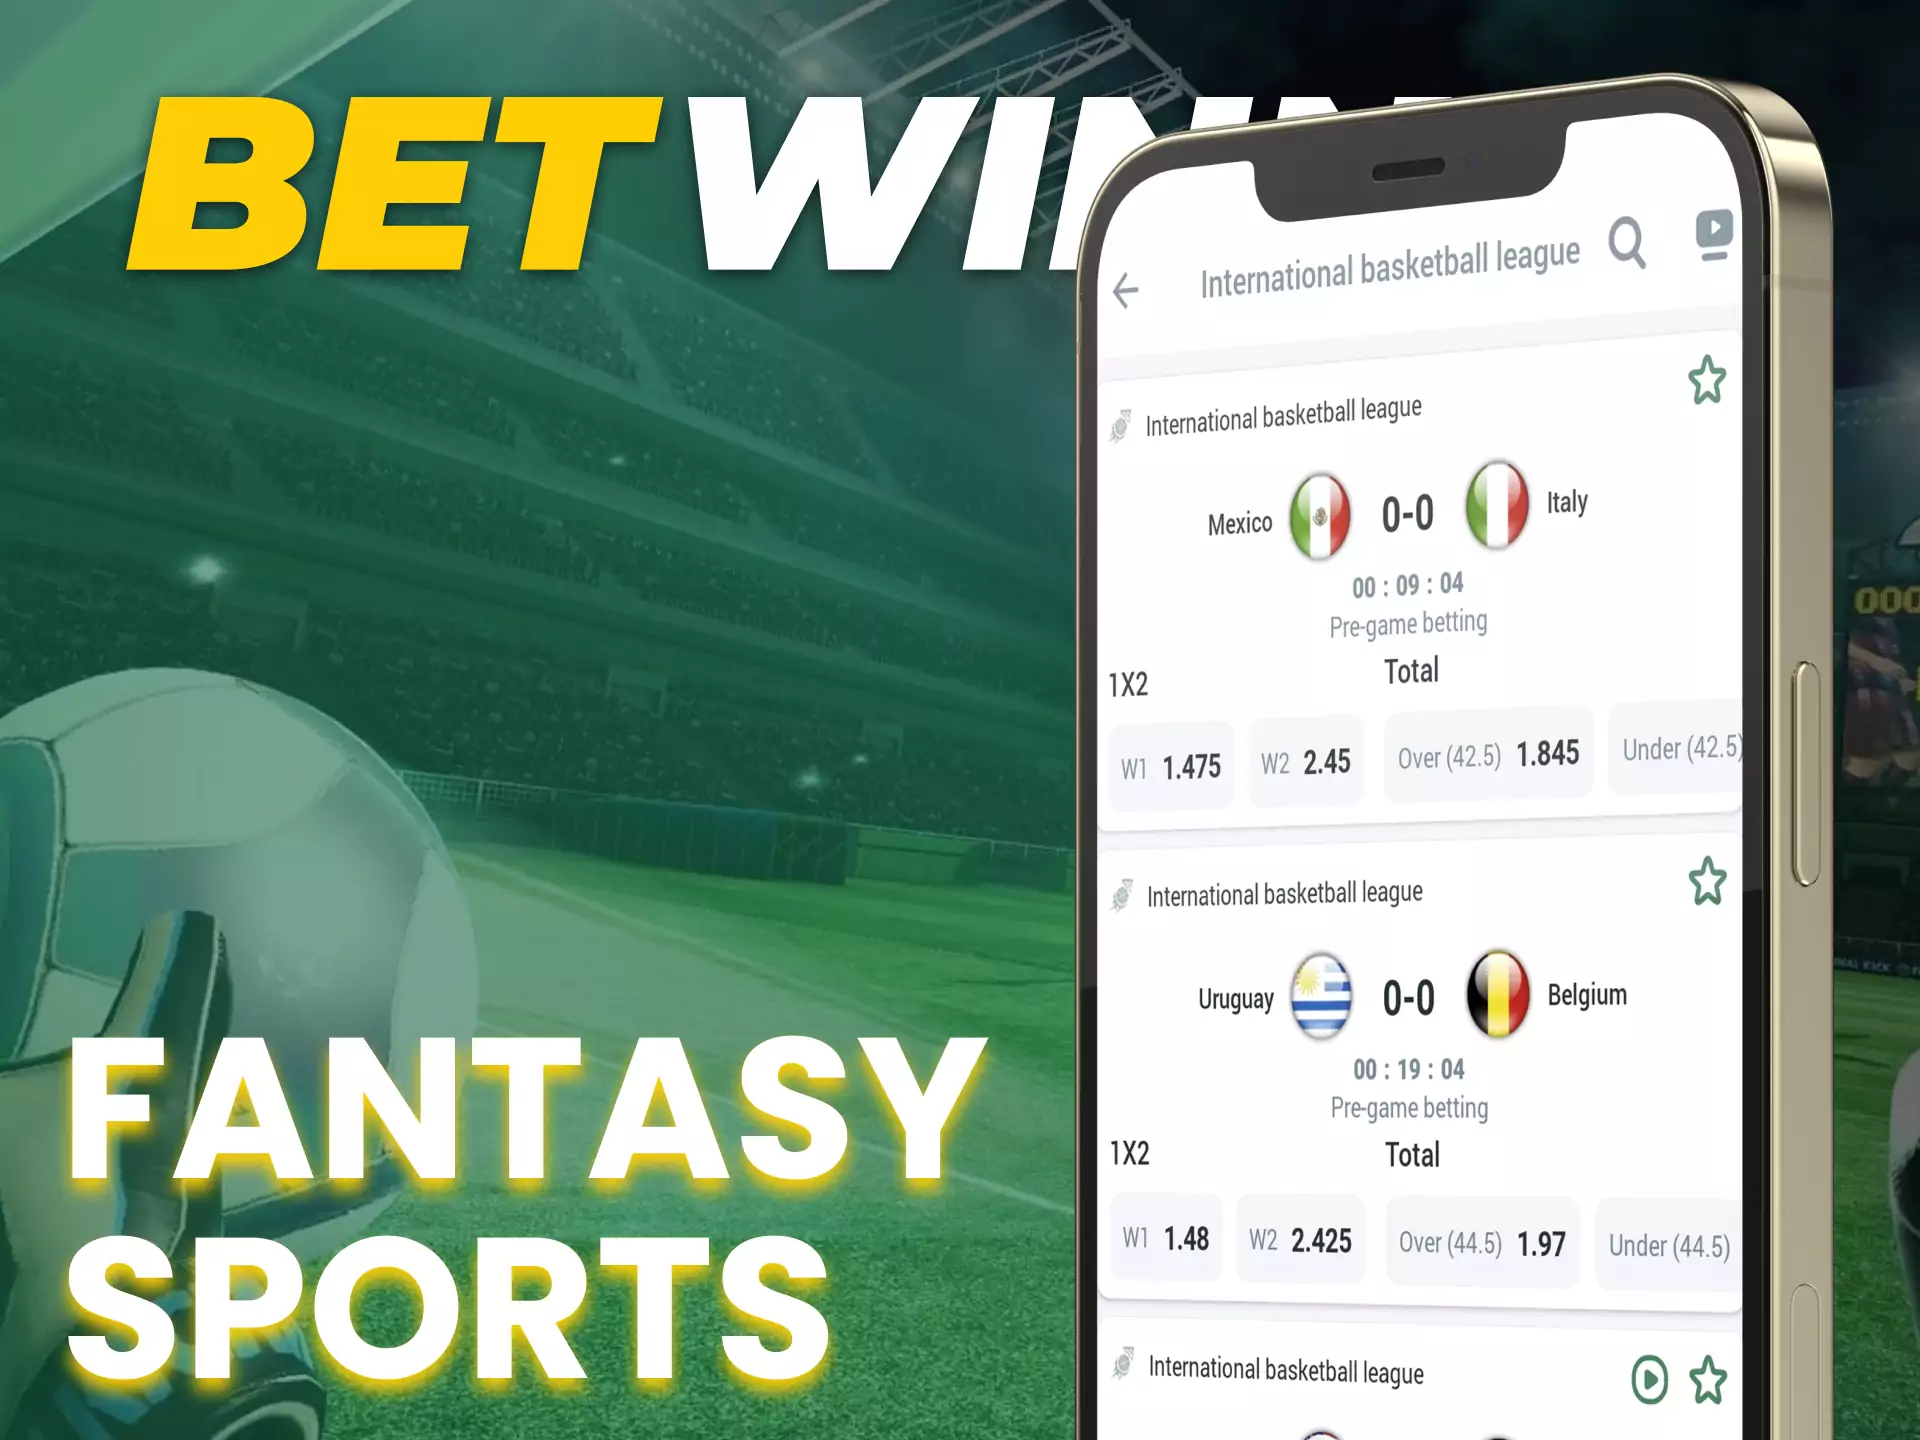 With the Betwinner app, bet on fantasy sports.